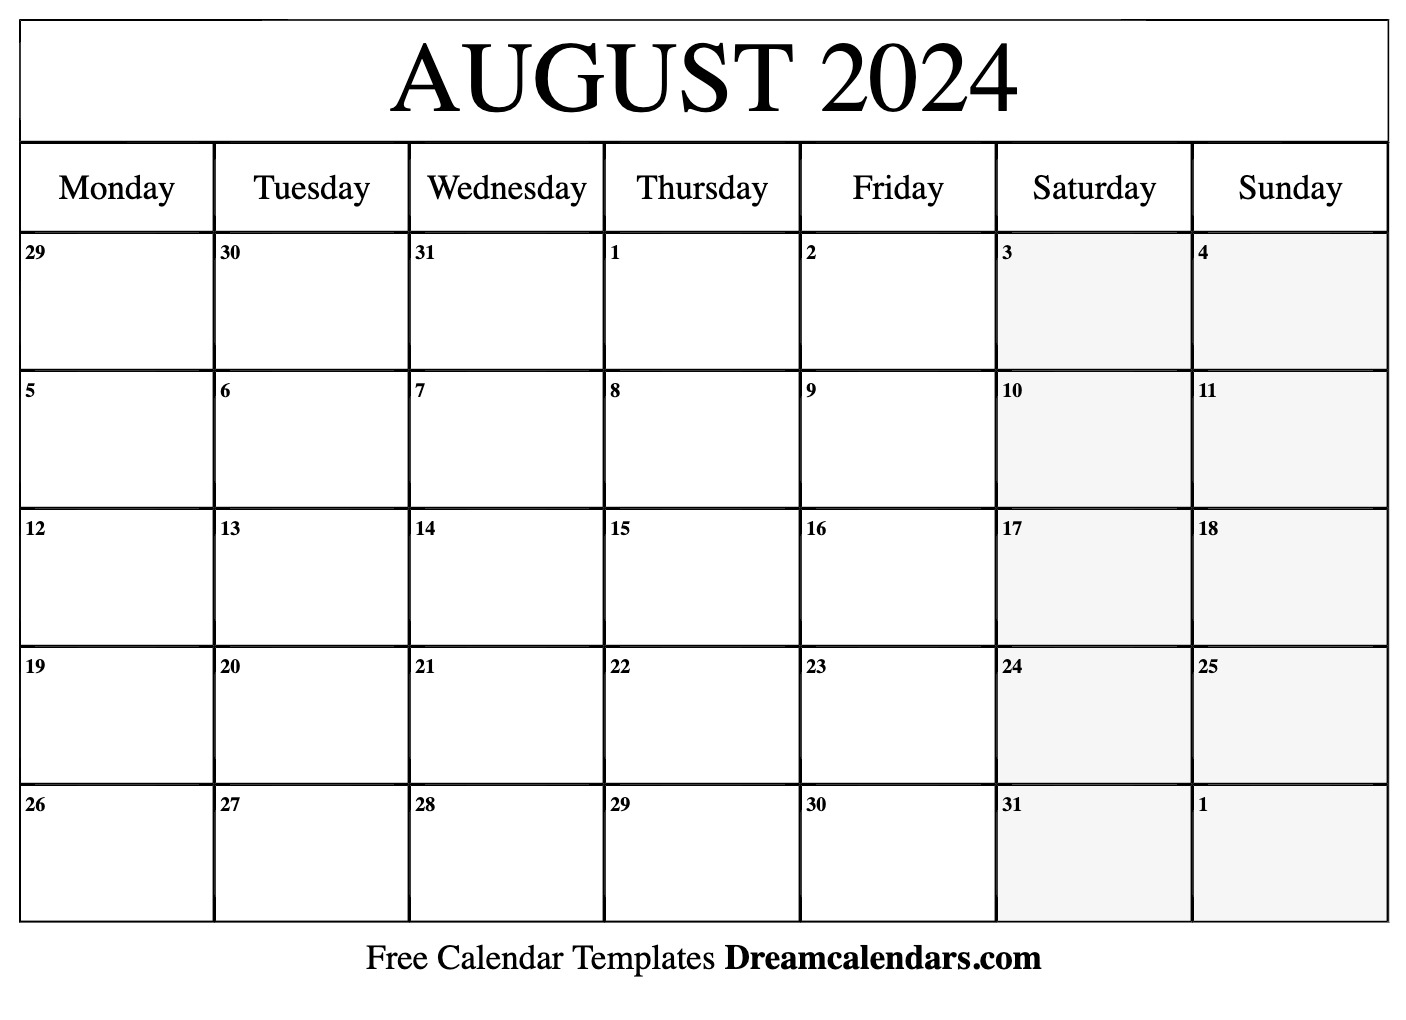 August 2024 Calendar | Free Blank Printable With Holidays for August Calendar Printable 2024